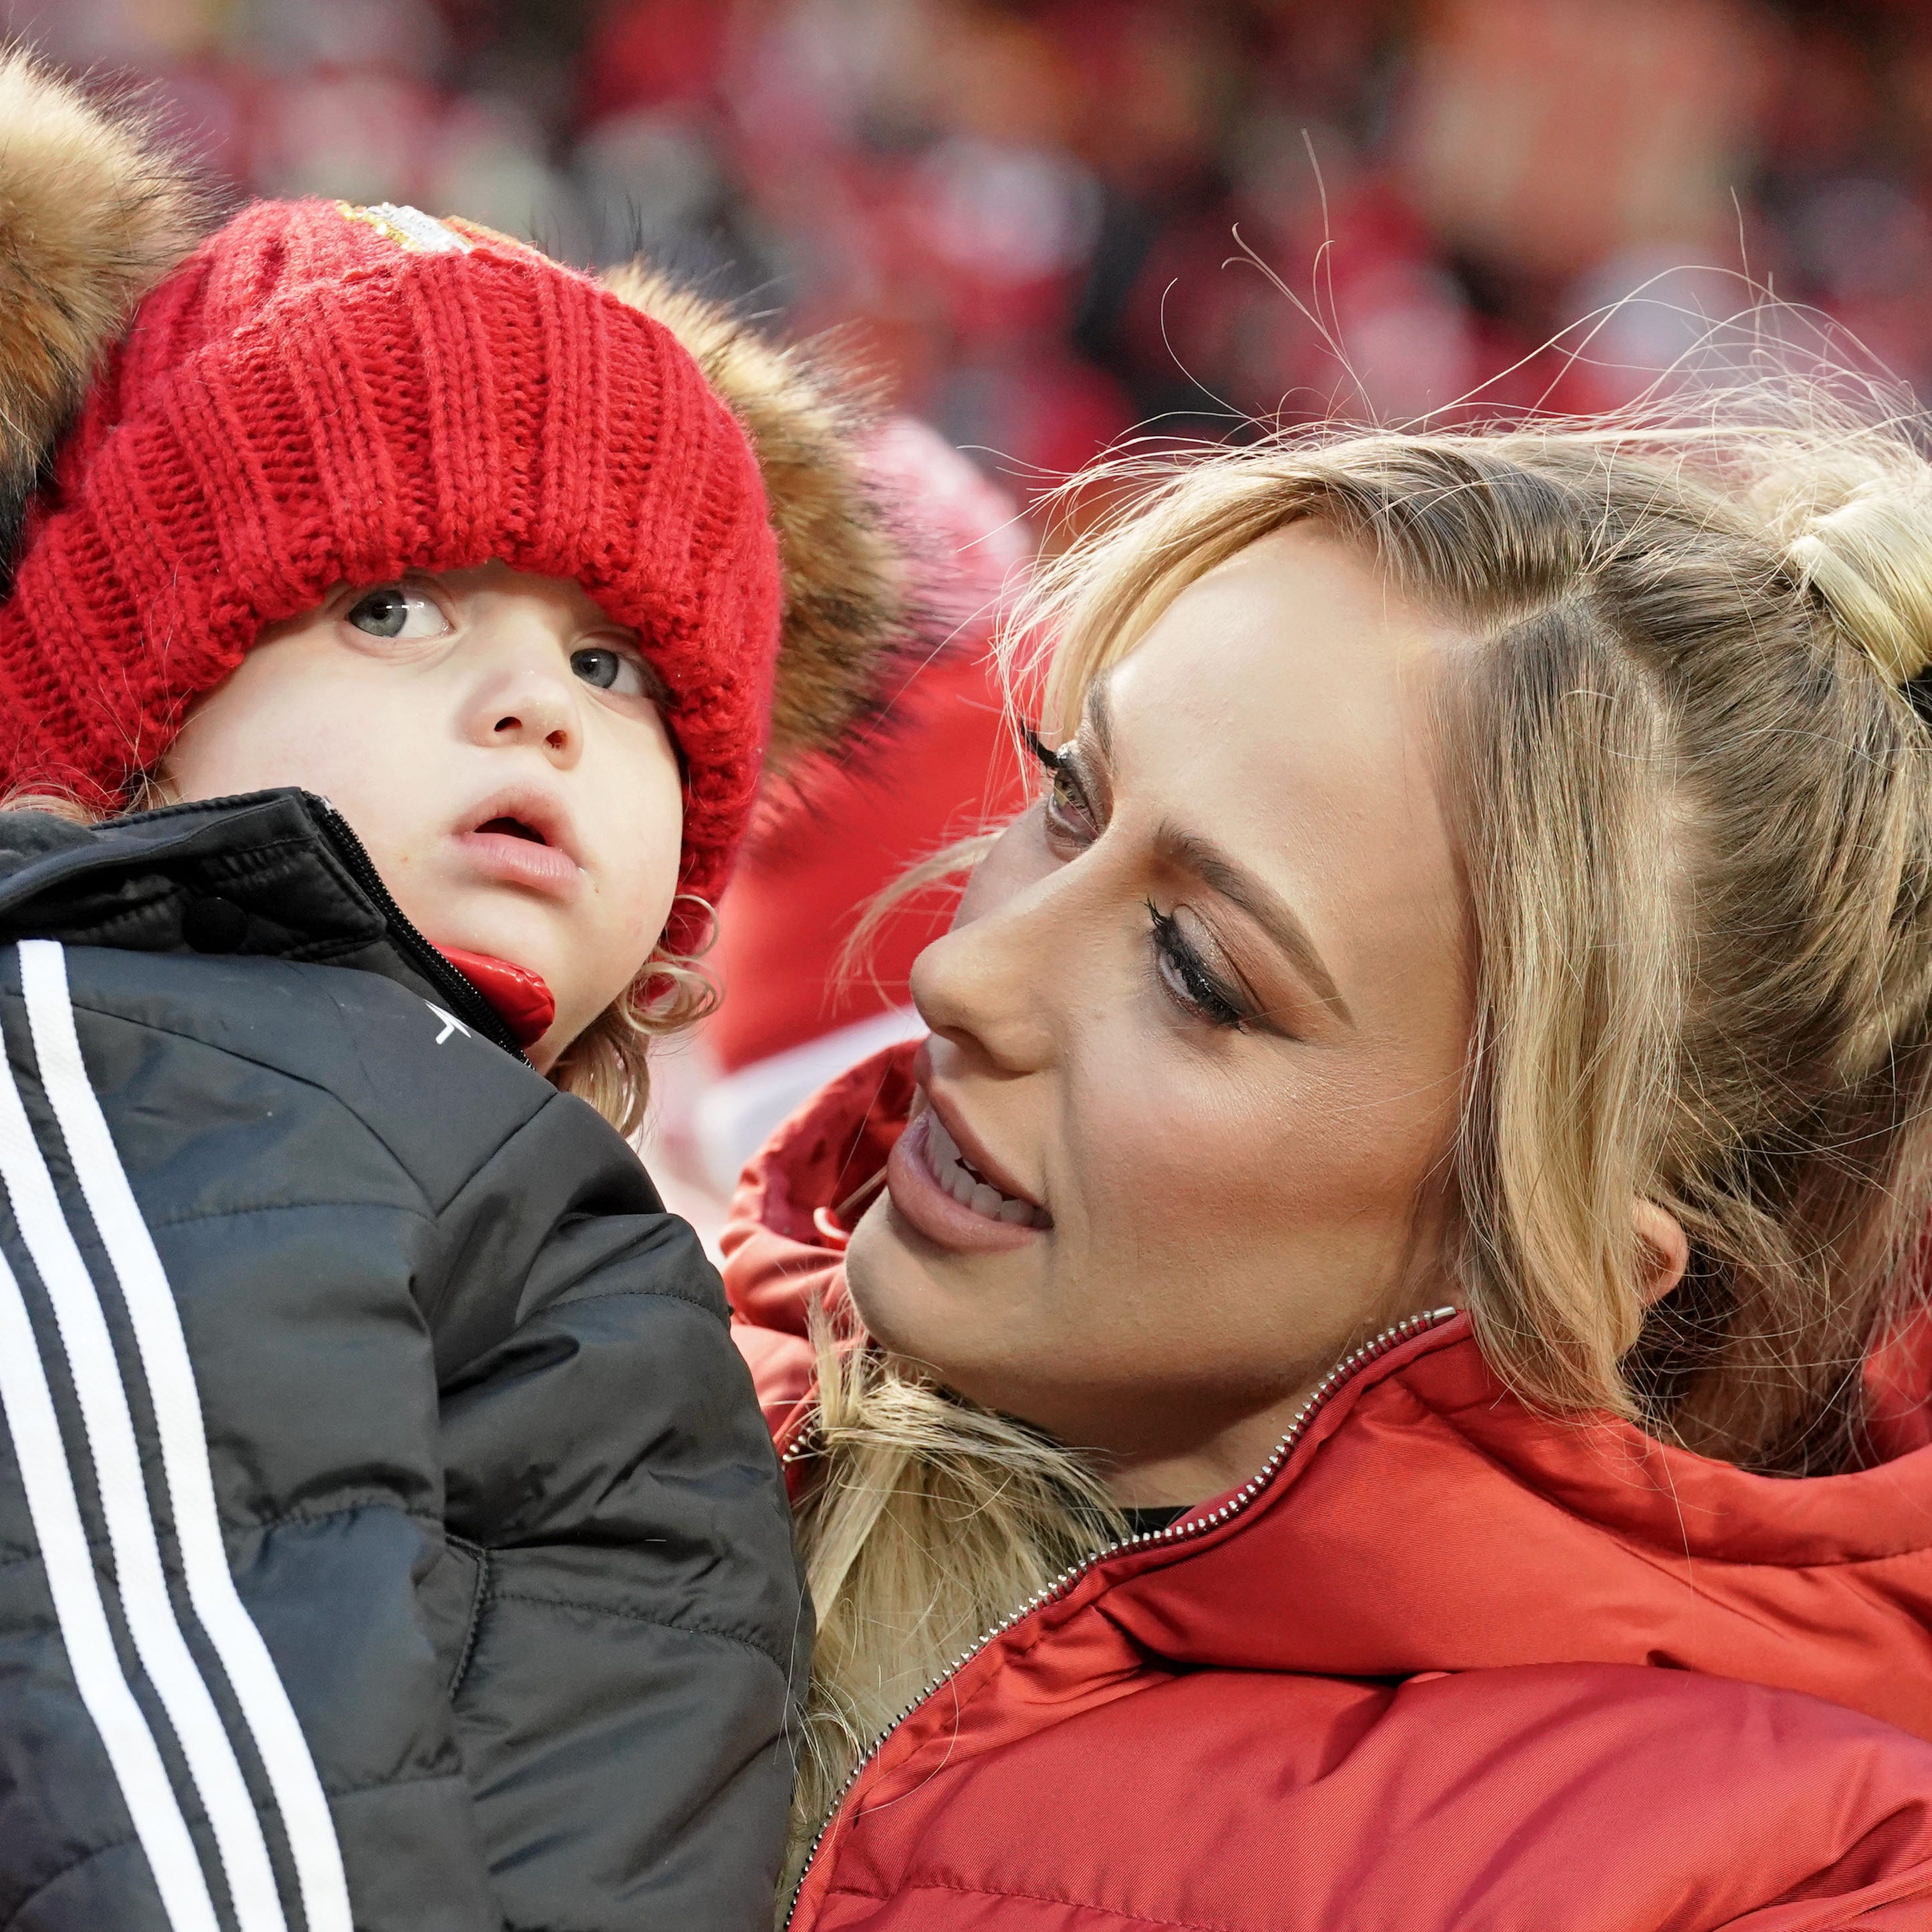 Brittany Mahomes holds up Sterling Skye as they watch warmups before the AFC championship game between the Kansas City Chiefs and the Cincinnati Bengals at GEHA Field at Arrowhead Stadium.